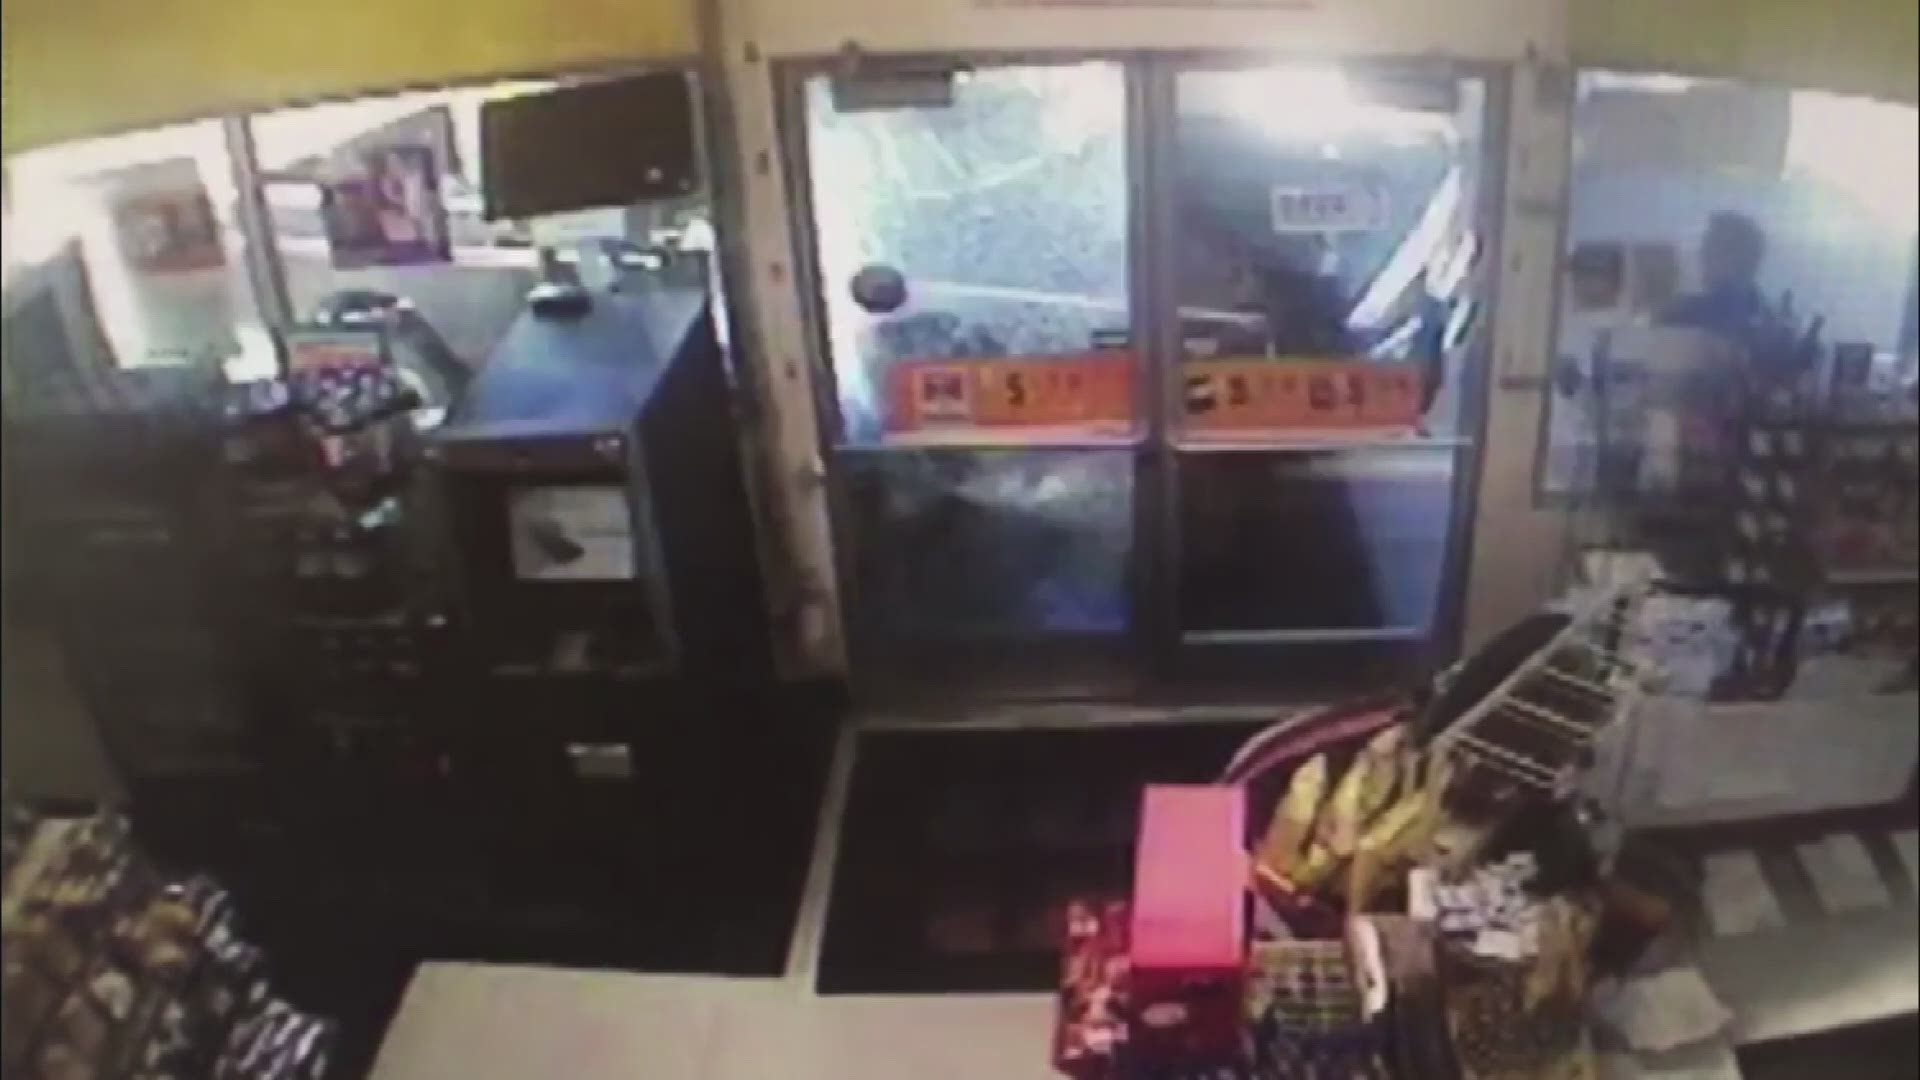 Surveillance video from the Arco in North Plains shows a pickup truck hitting the gas station and and employee